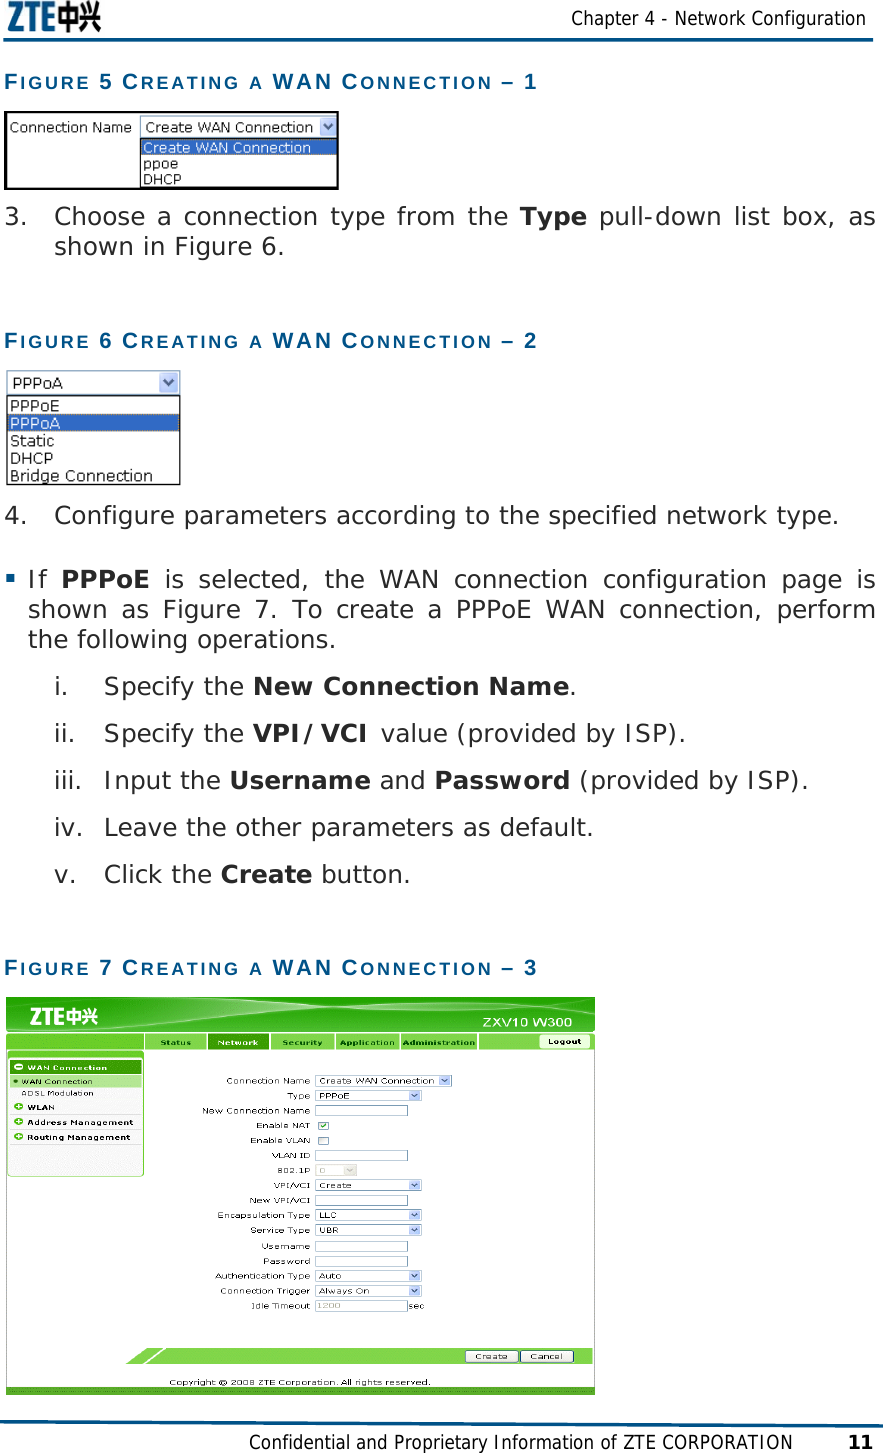  Chapter 4 - Network Configuration Confidential and Proprietary Information of ZTE CORPORATION 11 FIGURE 5 CREATING A WAN CONNECTION – 1   3. Choose a connection type from the Type pull-down list box, as shown in Figure 6. FIGURE 6 CREATING A WAN CONNECTION – 2   4. Configure parameters according to the specified network type.  If  PPPoE is selected, the WAN connection configuration page is shown as Figure 7. To create a PPPoE WAN connection, perform the following operations. i. Specify the New Connection Name. ii. Specify the VPI/VCI value (provided by ISP). iii. Input the Username and Password (provided by ISP). iv. Leave the other parameters as default. v. Click the Create button. FIGURE 7 CREATING A WAN CONNECTION – 3  